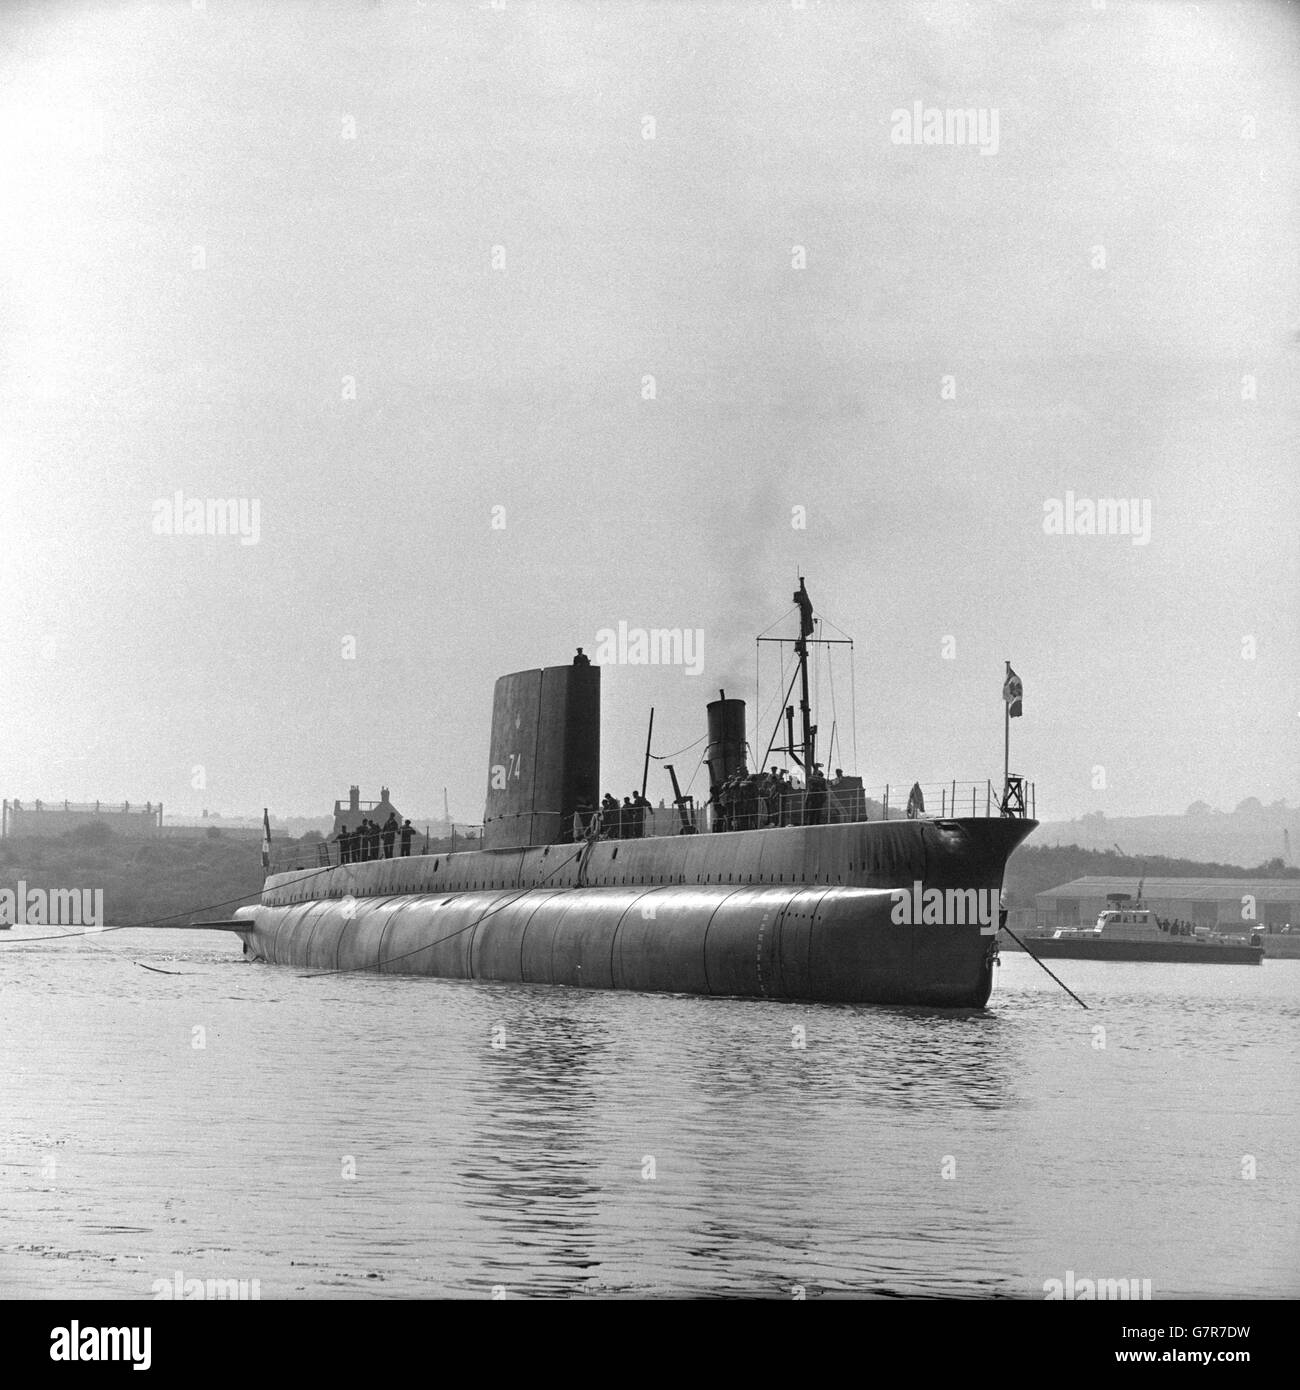 The oberon class submarine Okanagan, built for the Royal Canadian Navy, shortly after her launch from Chatham Dockyard, Kent. She was named by Madame Cadieux, wife of the Associate Minister of National Defence for Canada. Okanagan is the third and last of the present series of Oberon class submarines built for Canada. She will be ready for service in about a year. Stock Photo